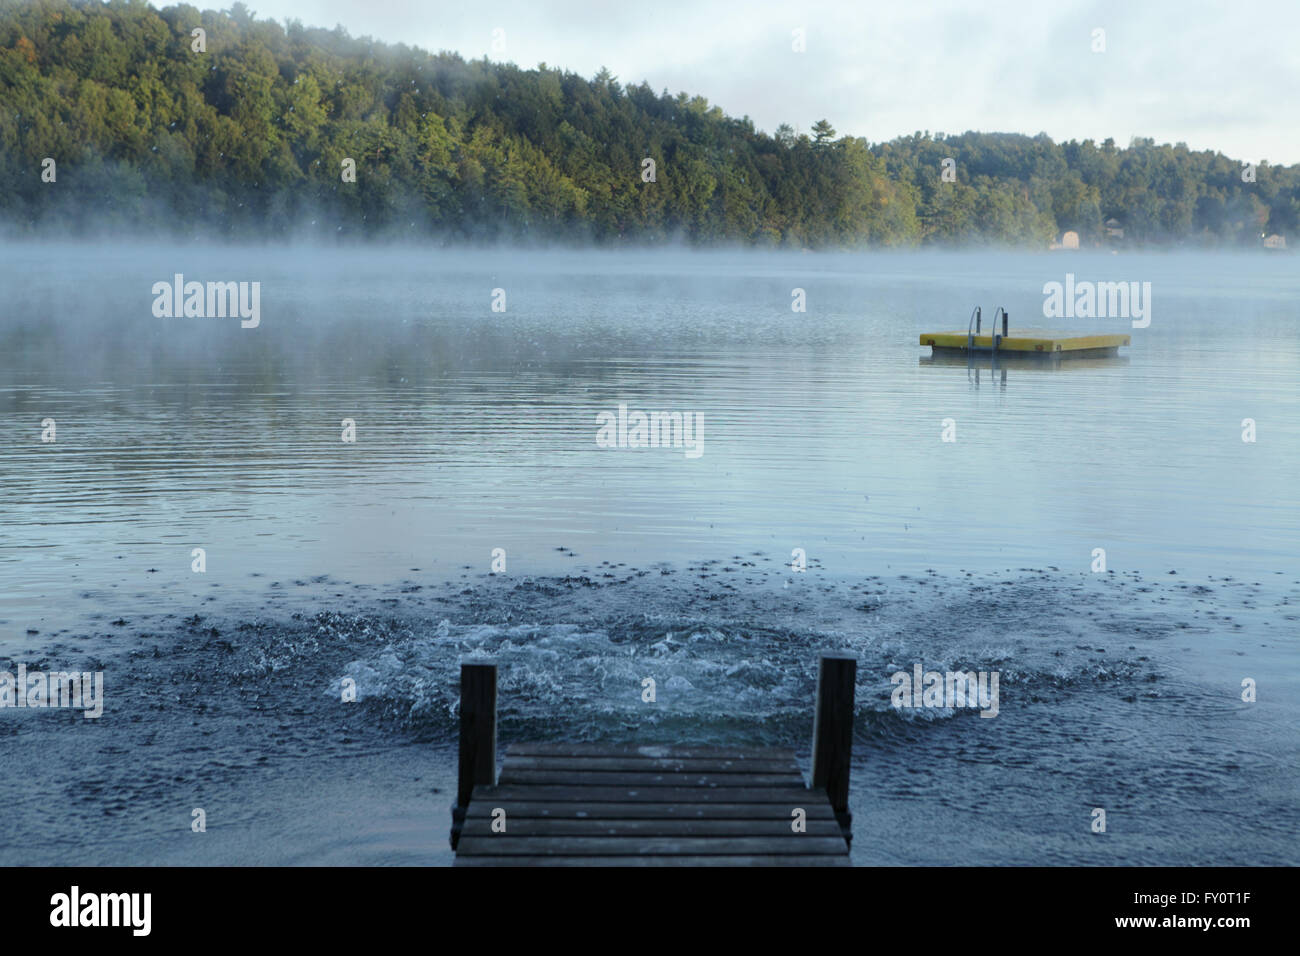 Jetty and yellow diving platform floating on a calm misty morning lake in Vermont. Large splash and ripples after someone dove Stock Photo